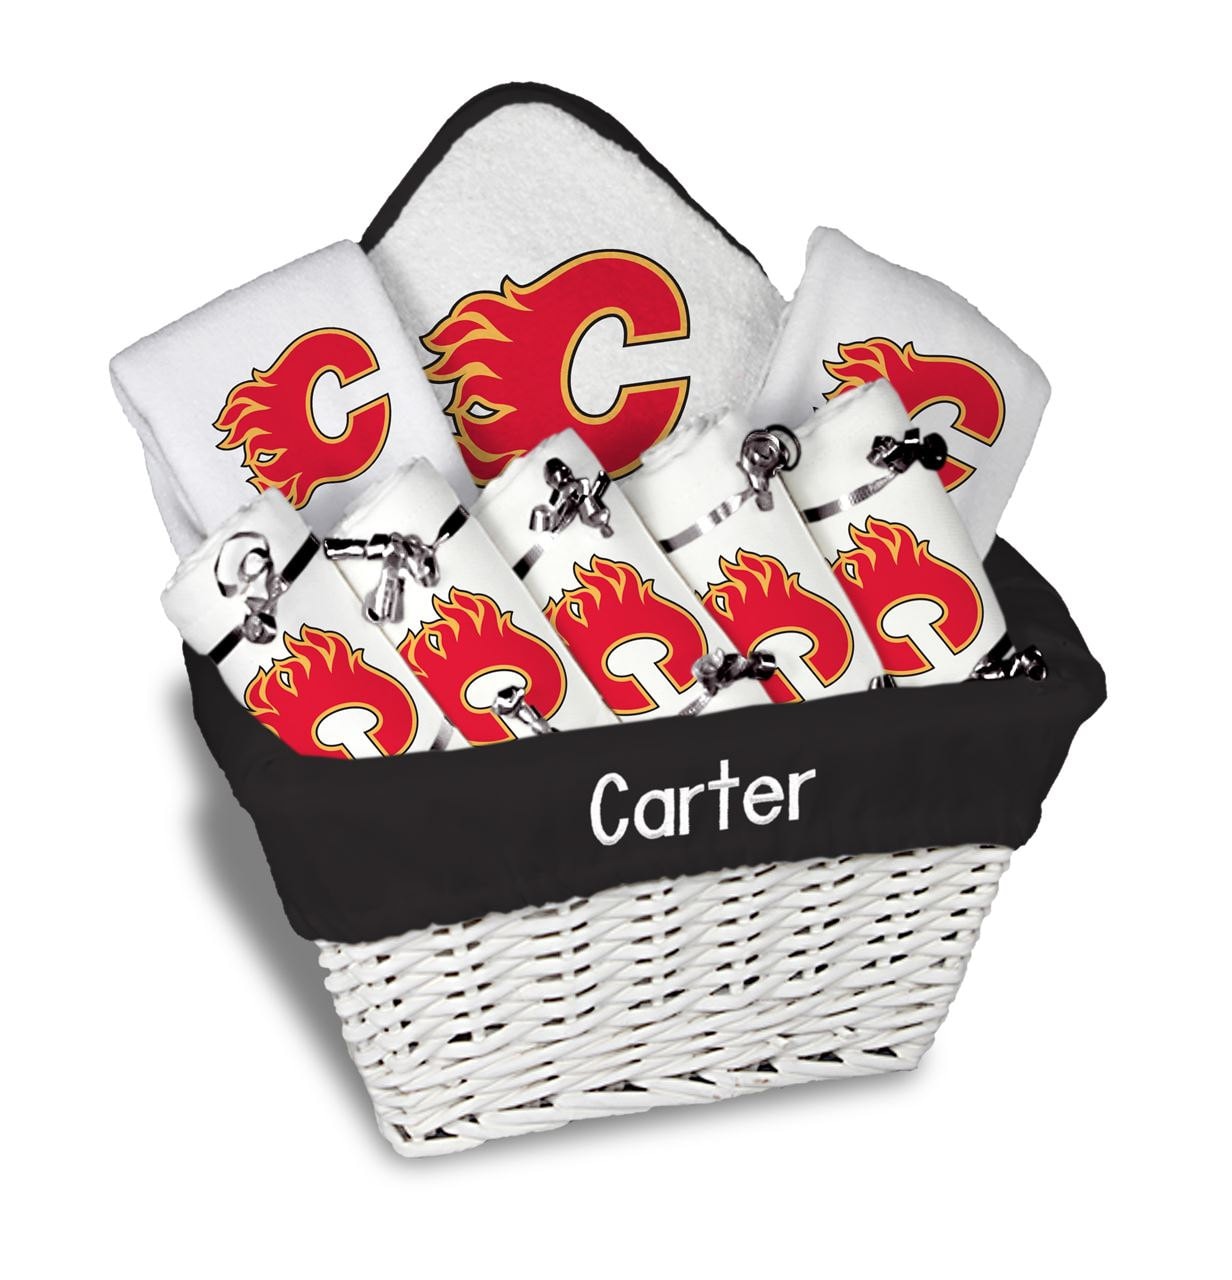 Stl Cardinals Personalized 9-Piece Gift Basket